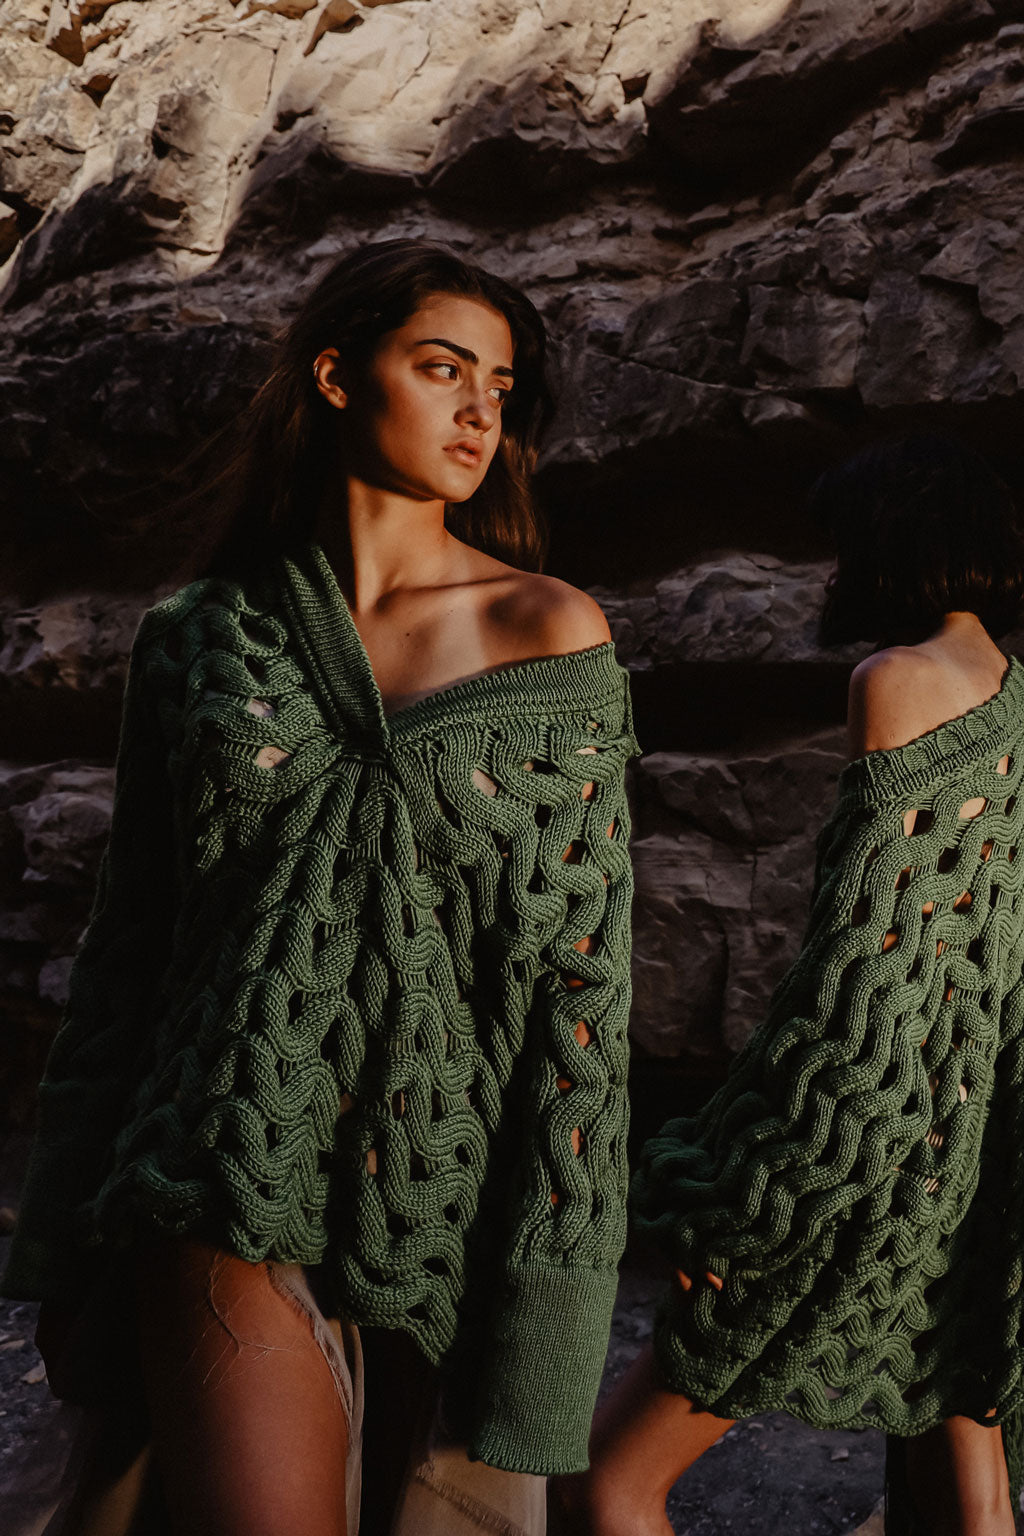 The Giselle by Abôvian, Product type - Sweater, Designed by LOOM Weaving